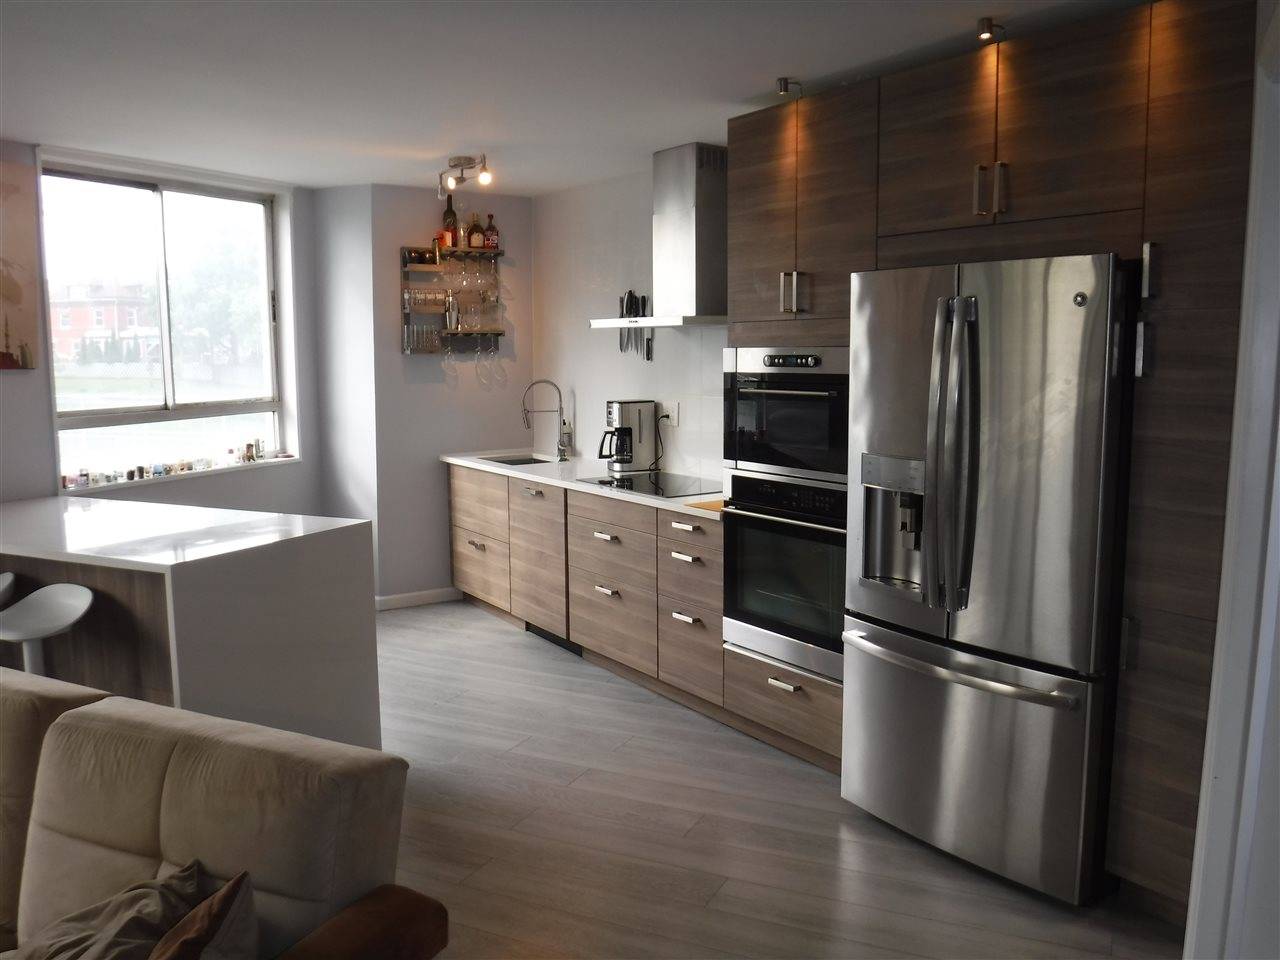 Ultra modern high-end renovations pops out as you walk into this tastefully designed 1bedroom